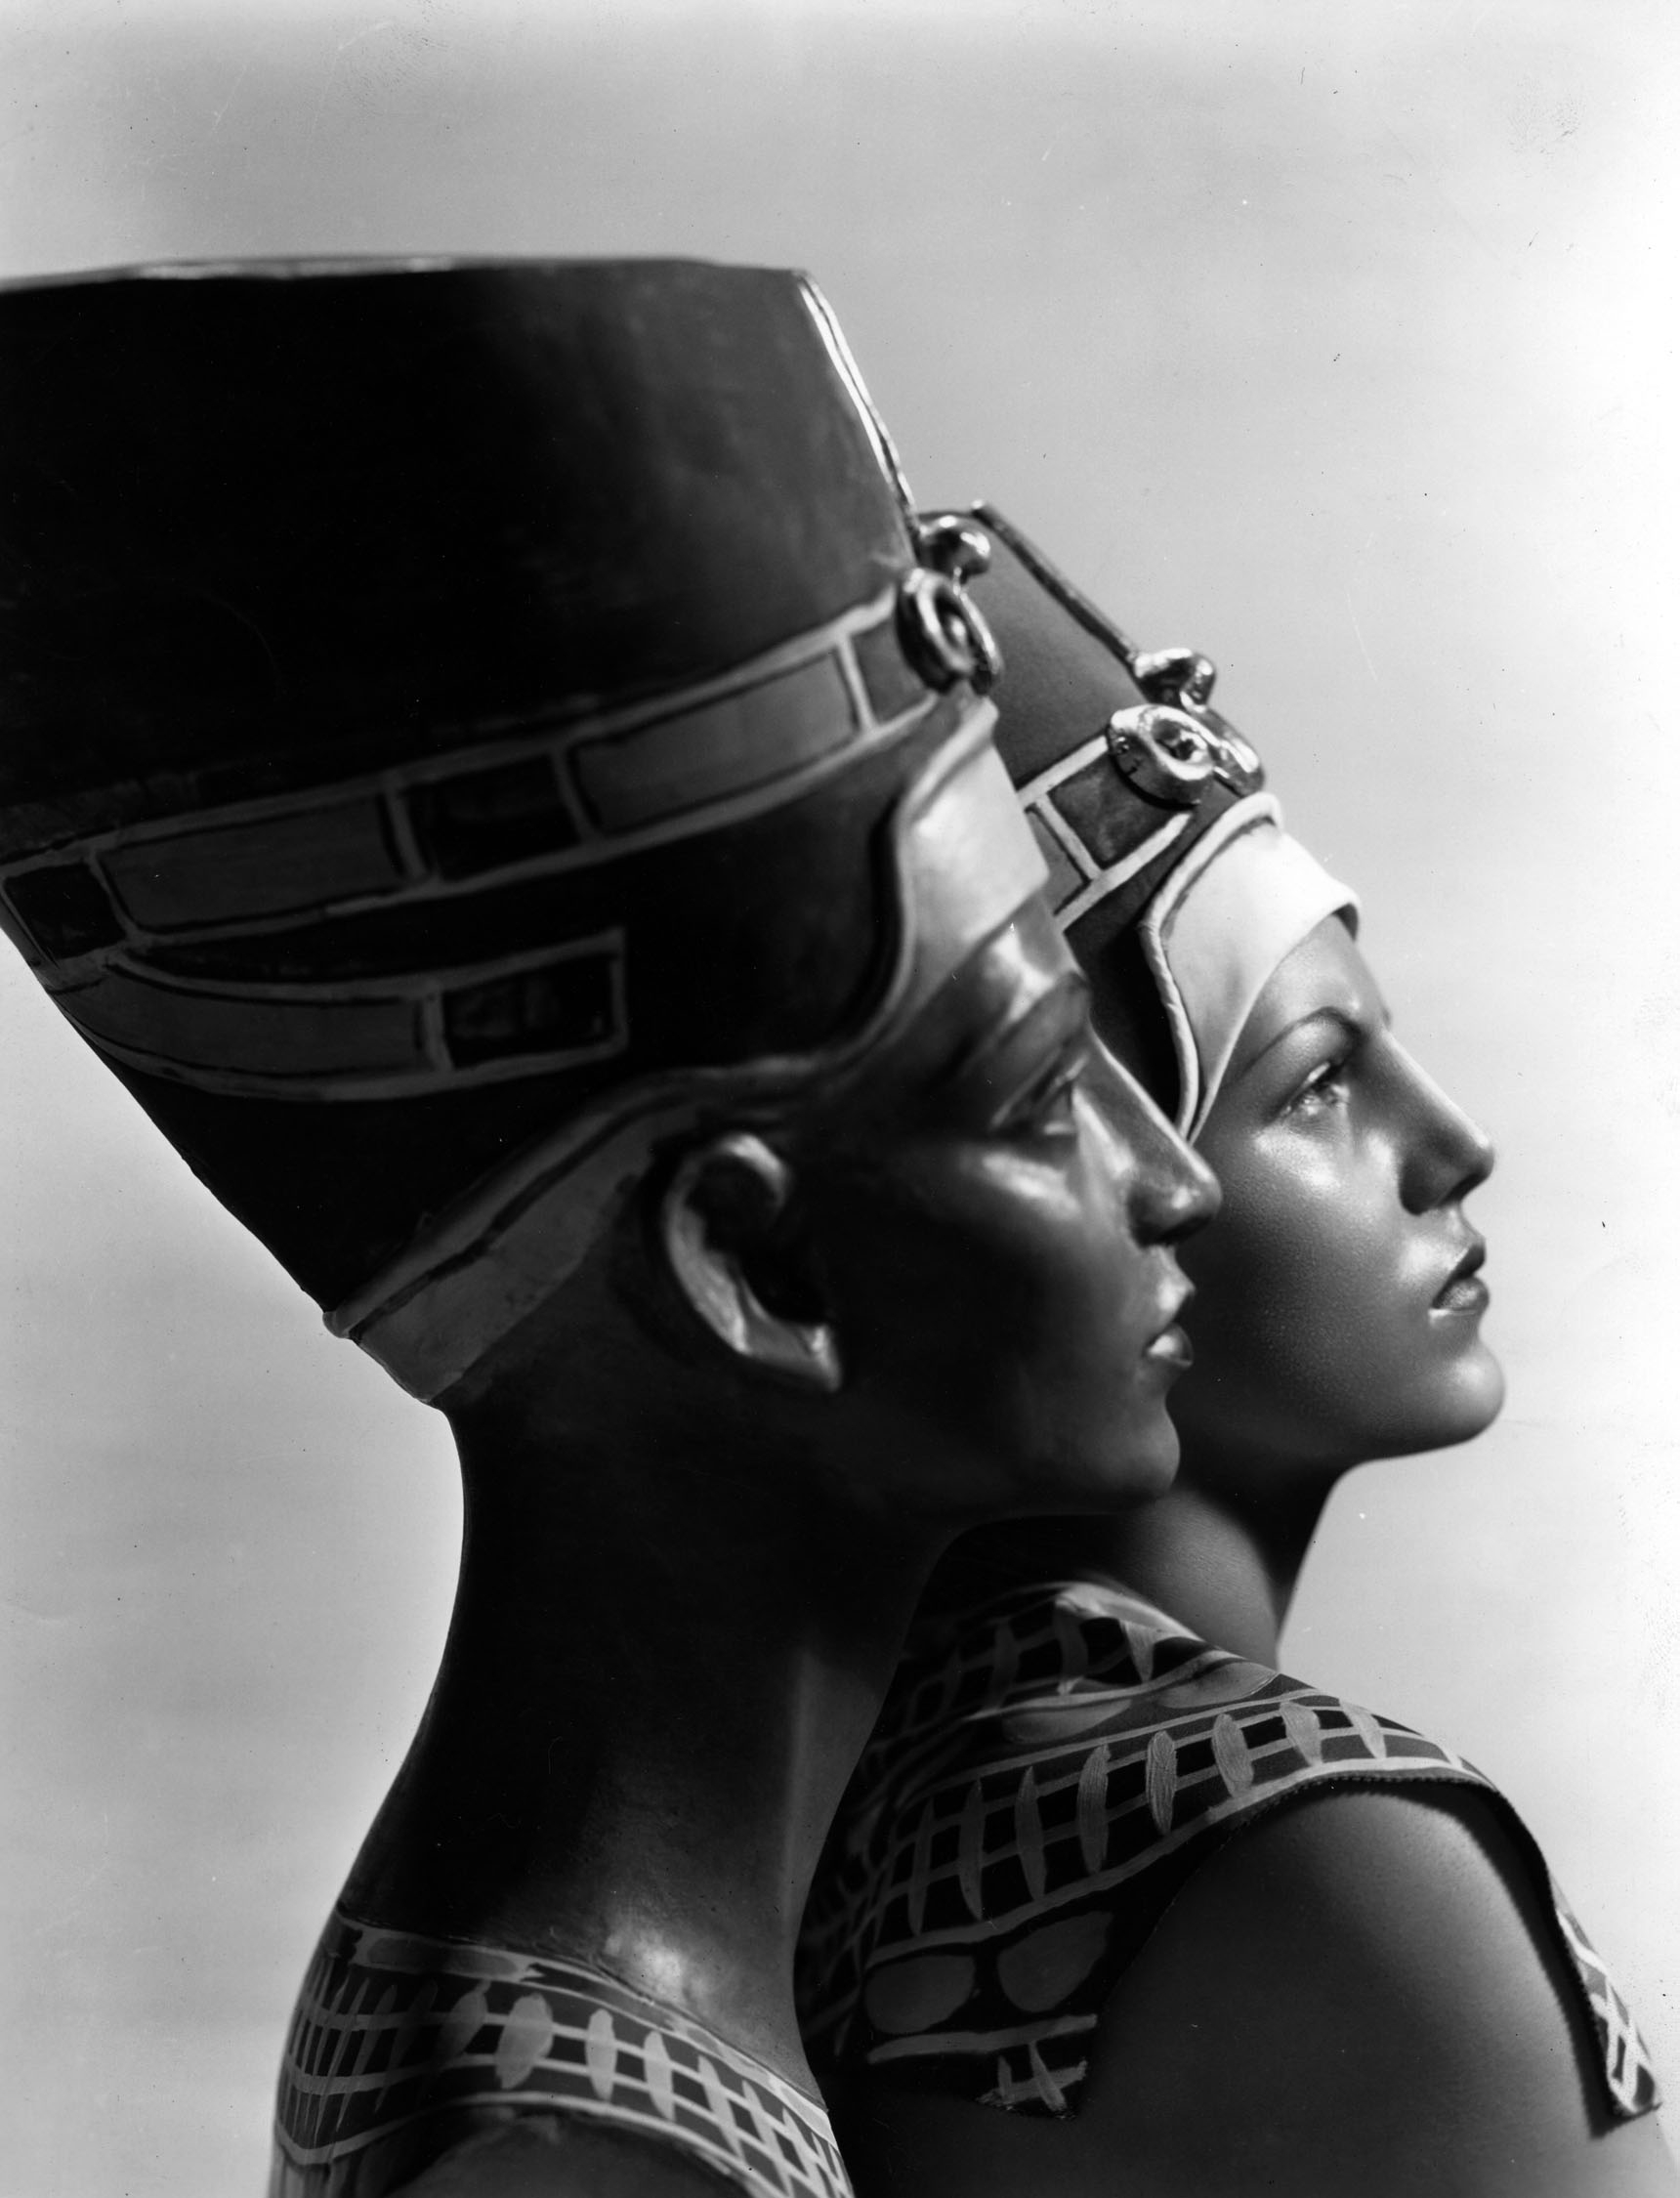 Fox publicity still featuring Cansino as Nefertiti, circa 1935. Original caption reads:"REINCARNATION? Nefertiti, Egyptian queen said to be the most beautiful woman of antiquity, seems to have been born again in the person of Rita Cansino, F ox Film debutante star, whose resemblance to the famous statue of the royal beauty is considered remarkable."